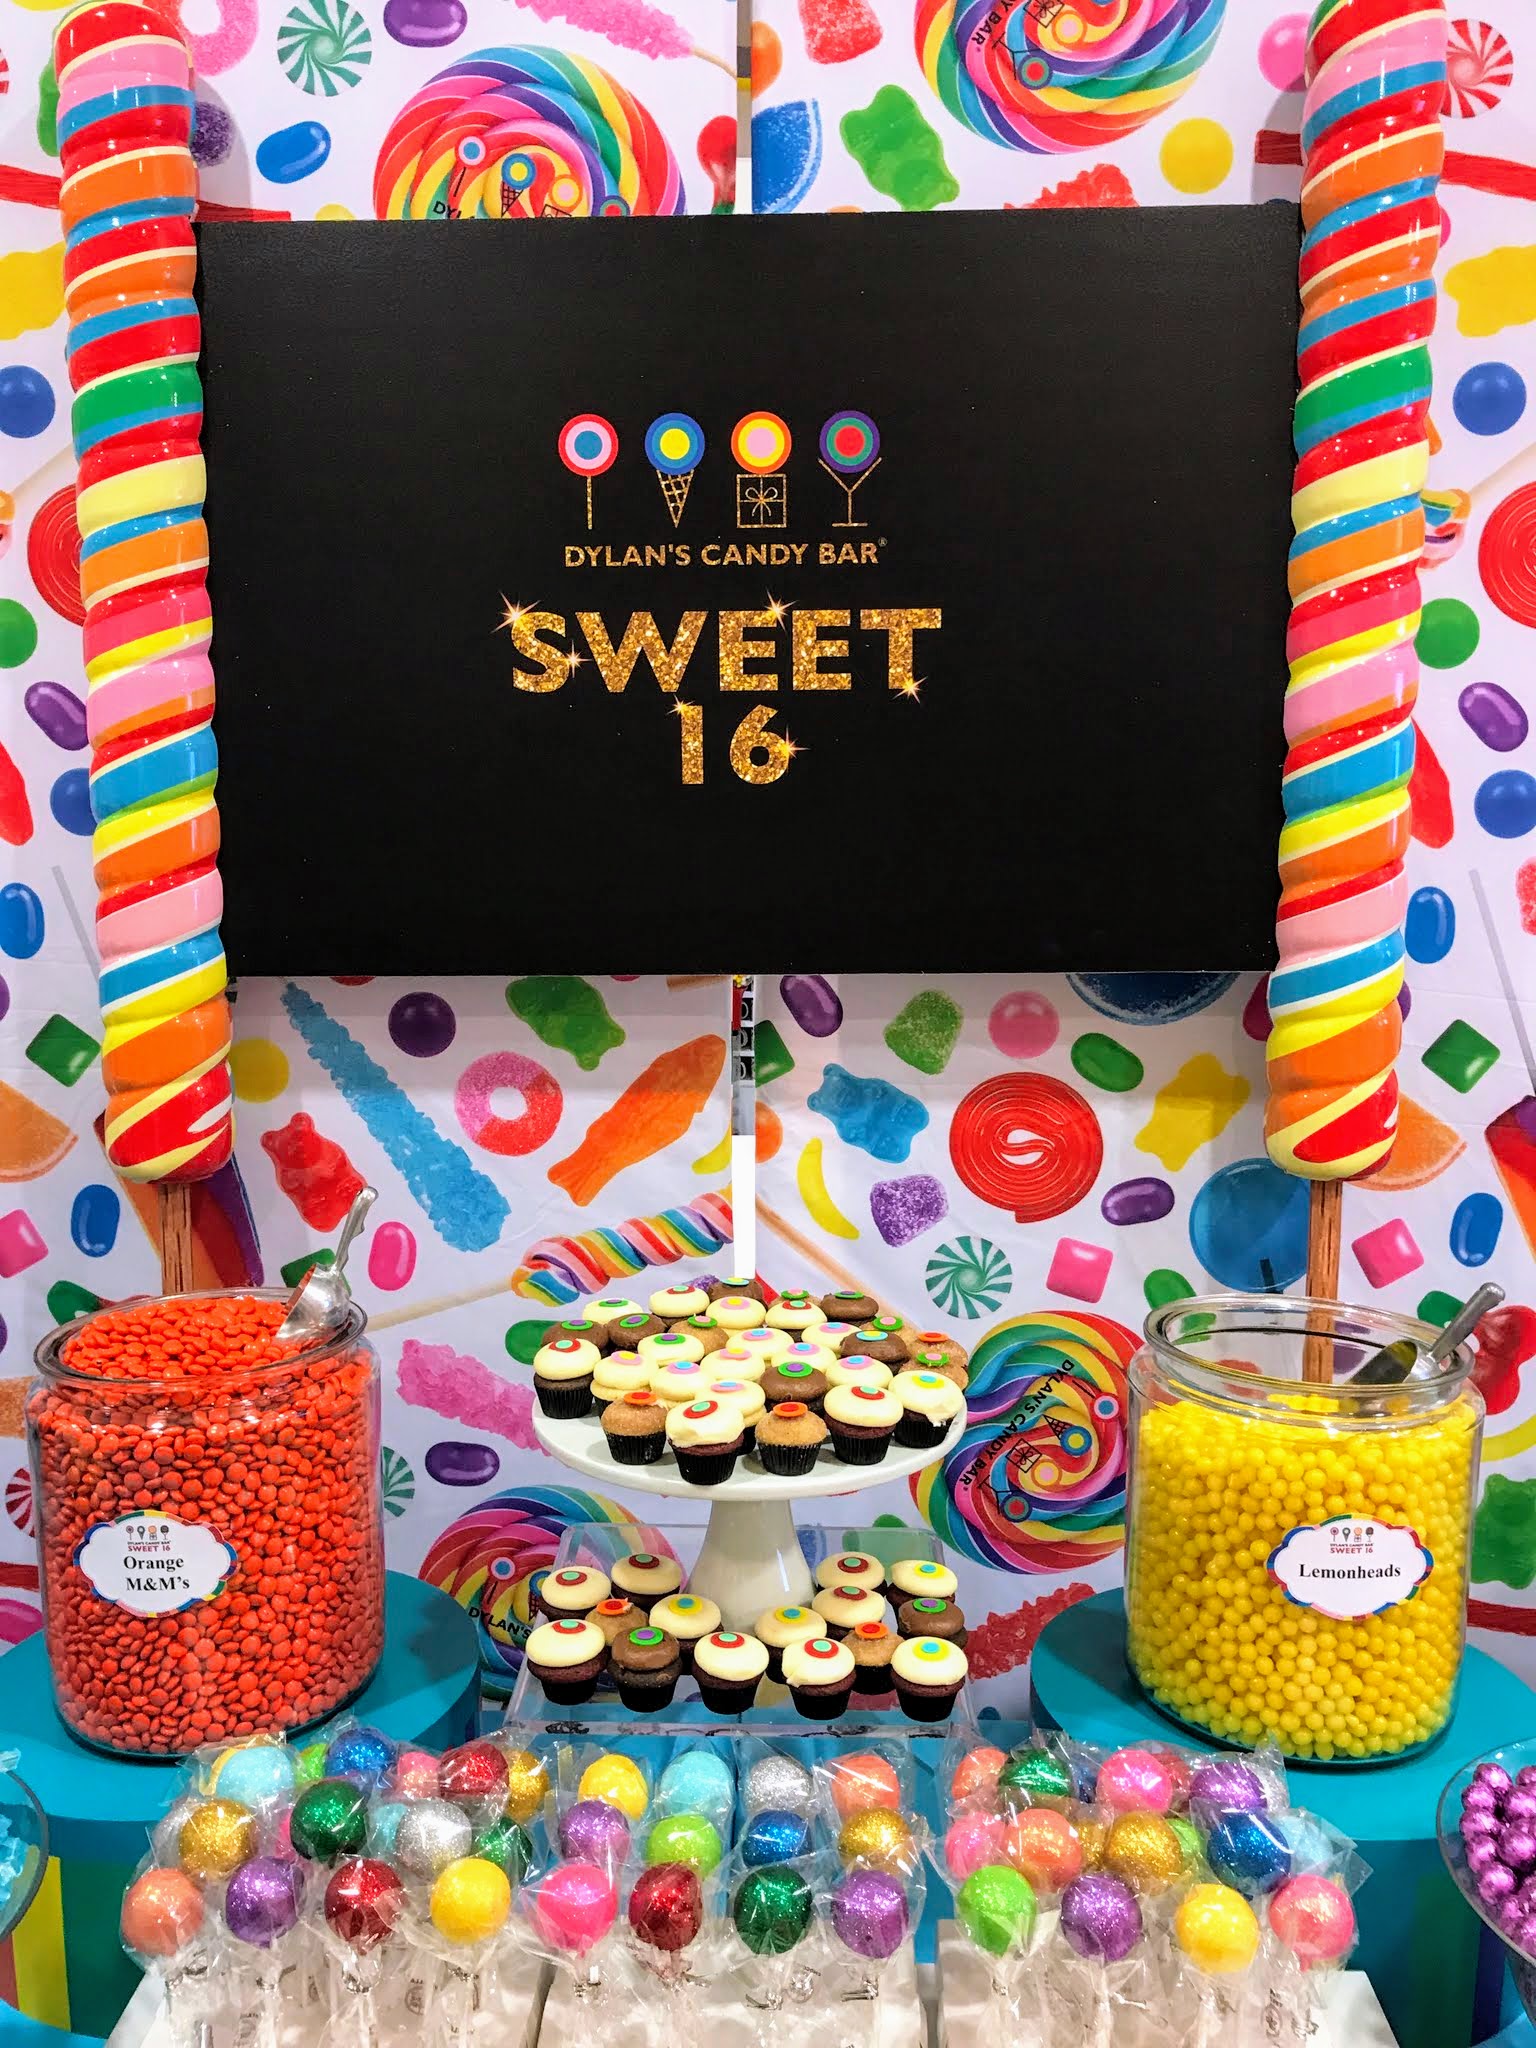 Happy Sweet 16 to Dylan's Candy Bar - The Martha Stewart Blog